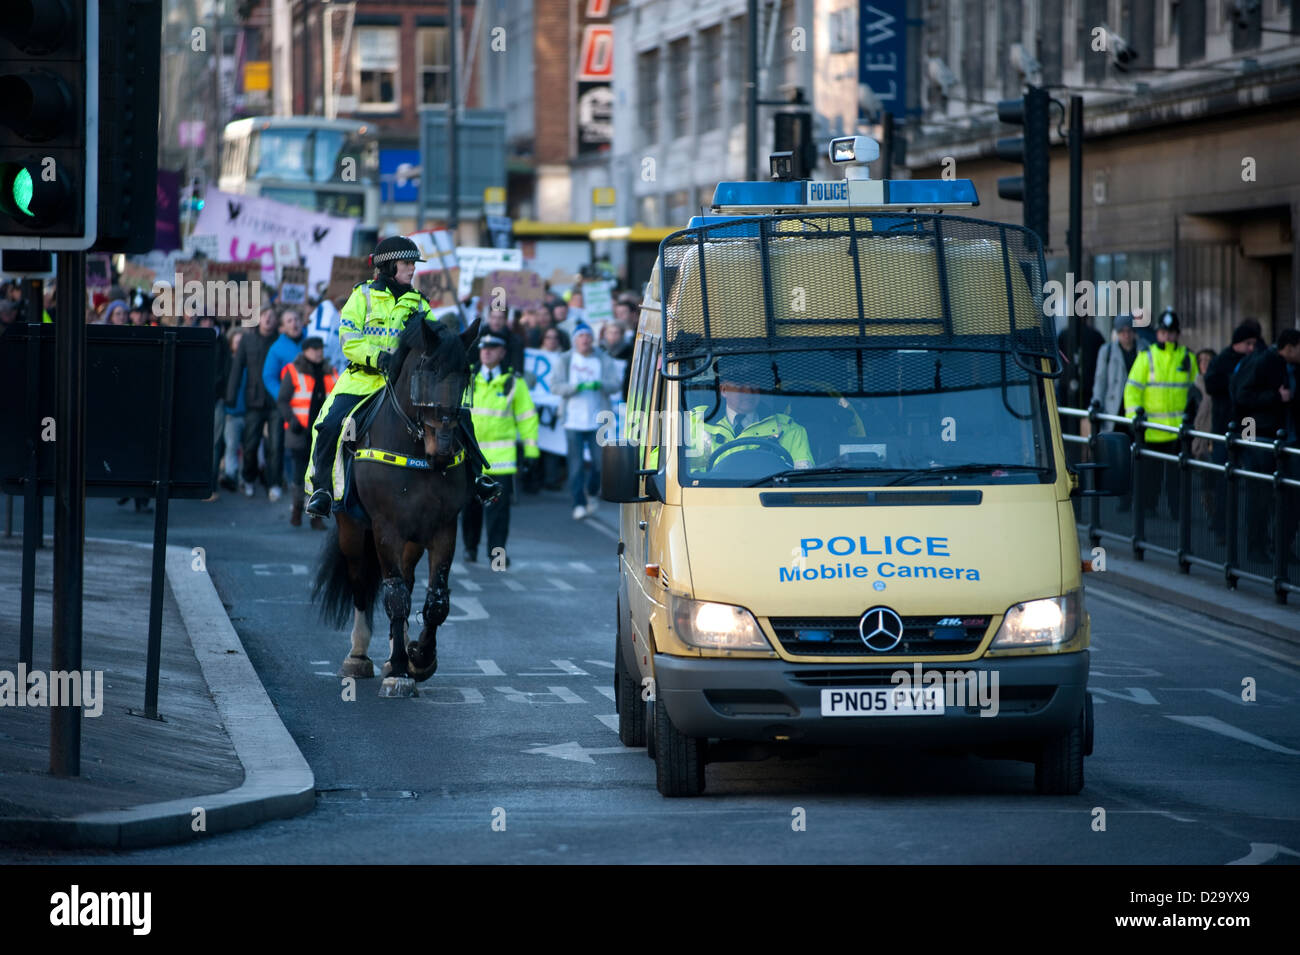 Police Riot Van and Horse Demonstration UK Stock Photo